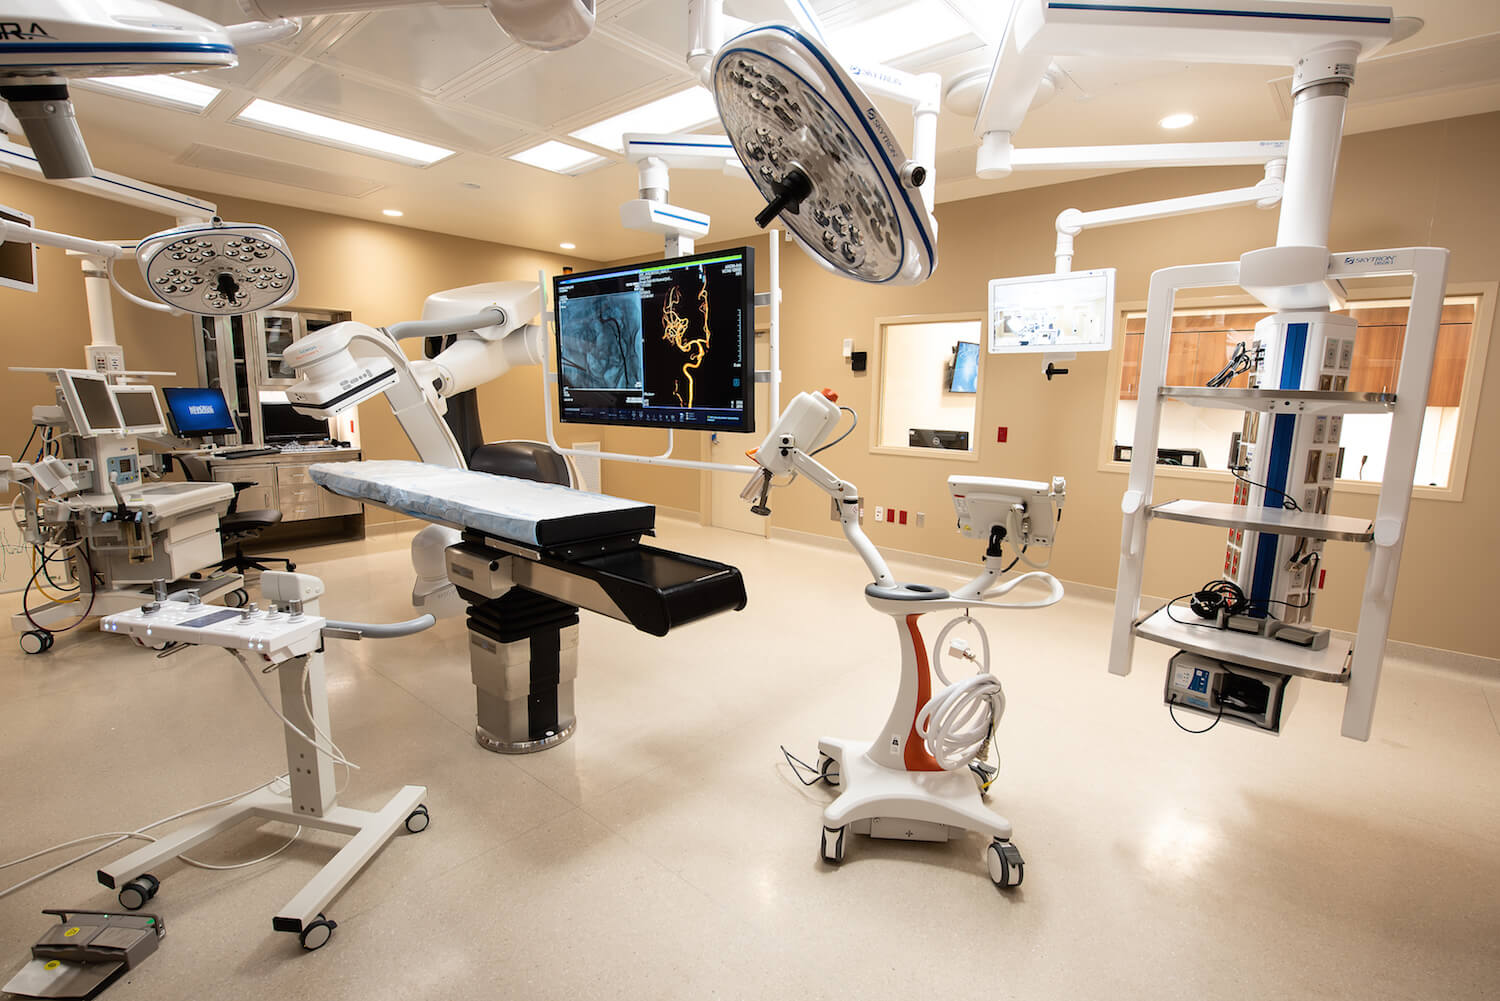 The Susan and Fayez Sarofim Pavilion features new hybrid operating rooms, which combine traditional ORs with advanced imaging techniques. (Courtesy photo)